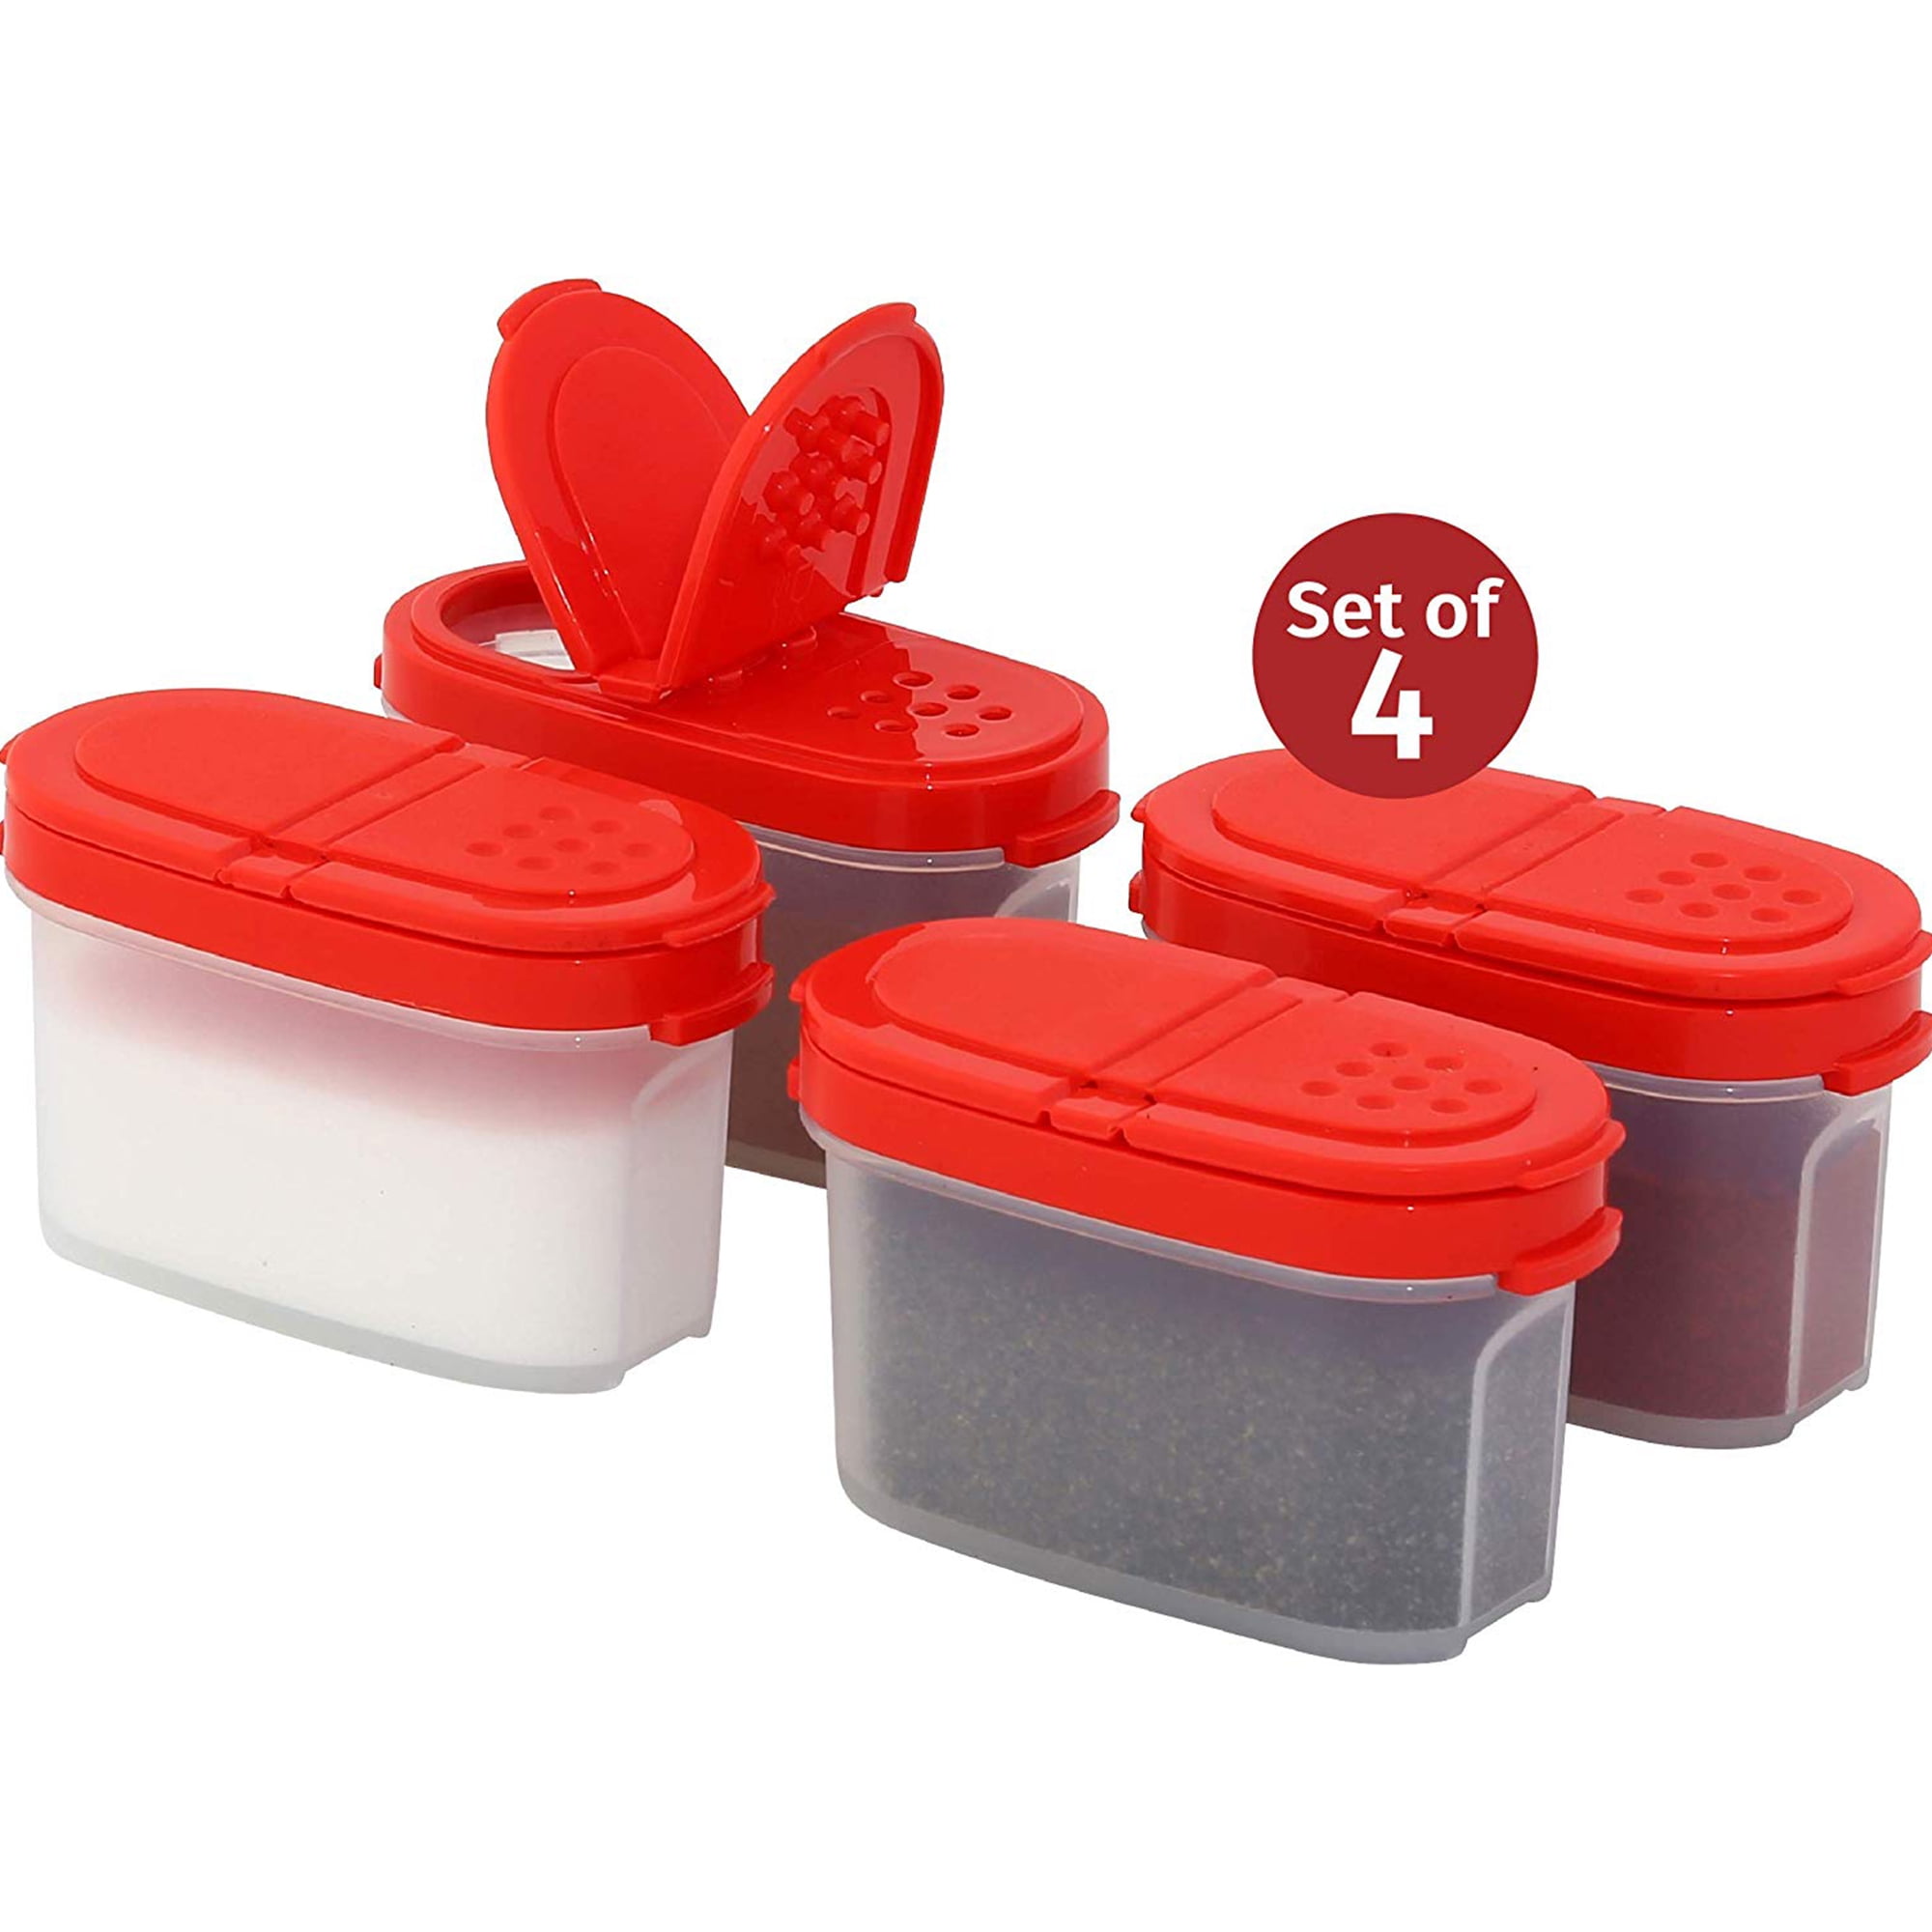 6 Mini square seasoning vat with lid and container